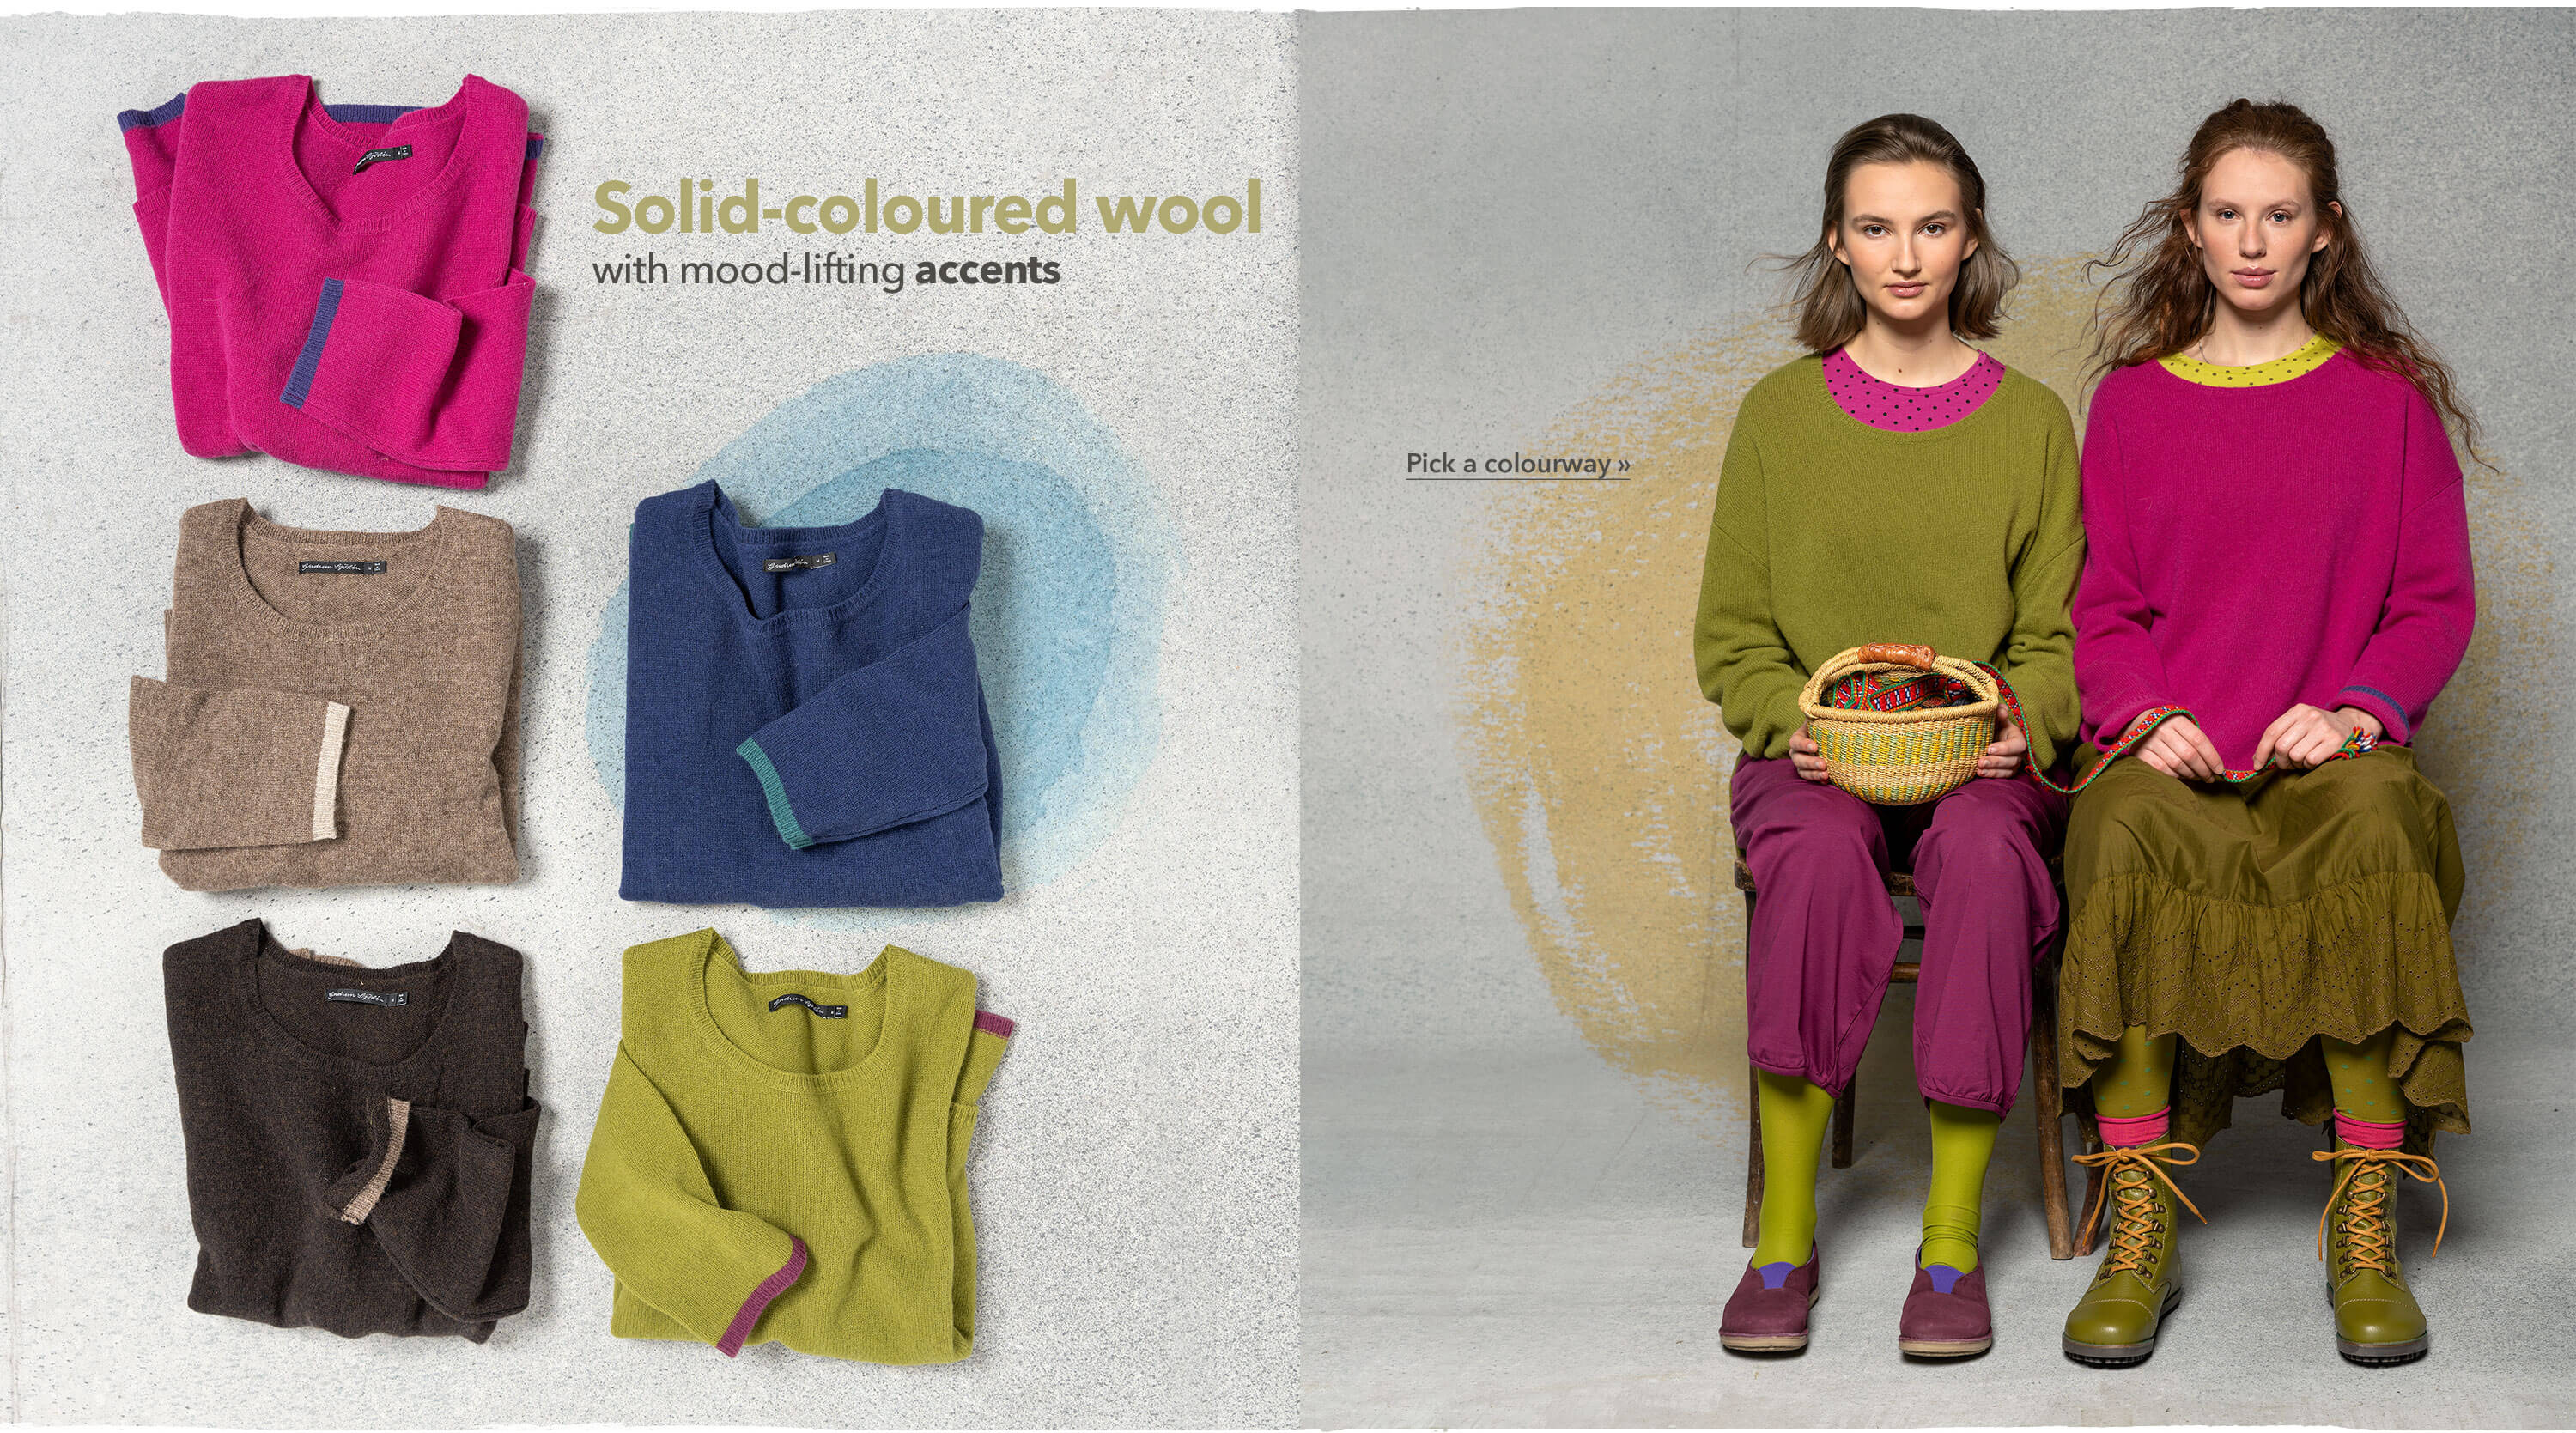 Solid-coloured wool with mood-lifting accents.